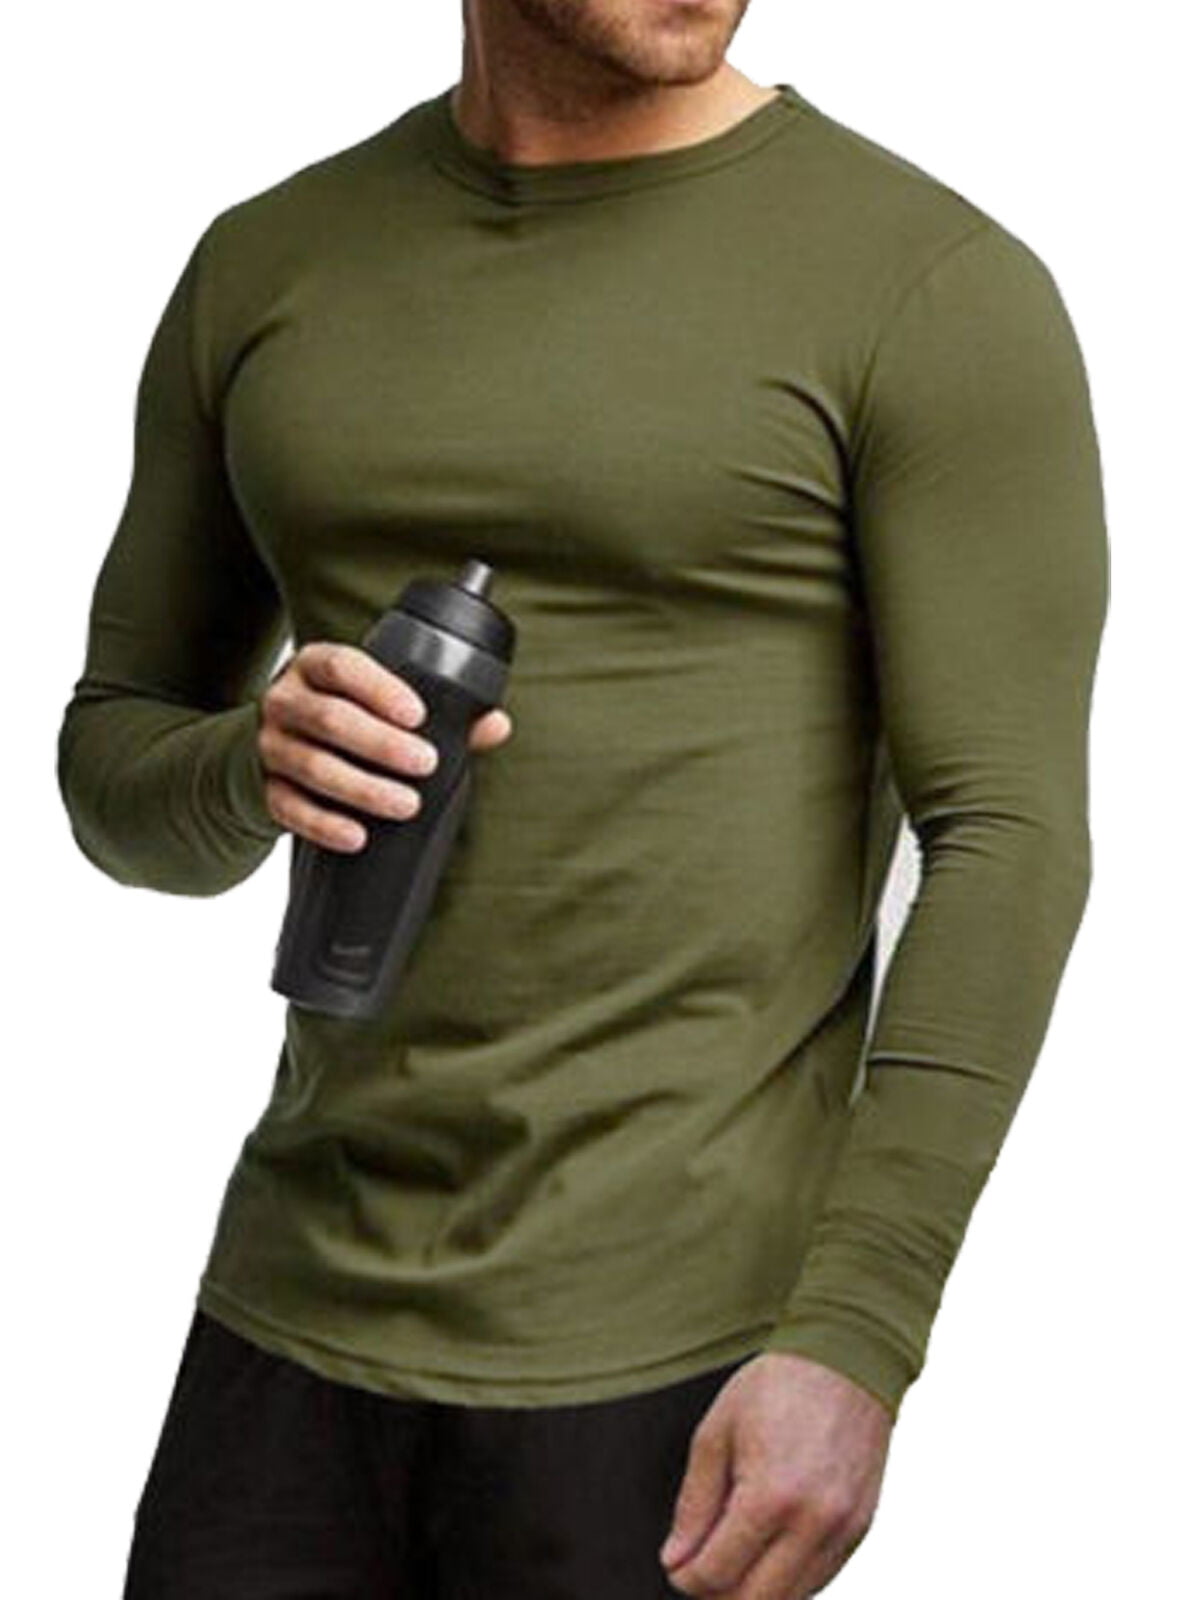 Mens Slim Fit Athletic Muscle Hoodies T-shirt Tops Gym Sports Long Sleeve Blouse 